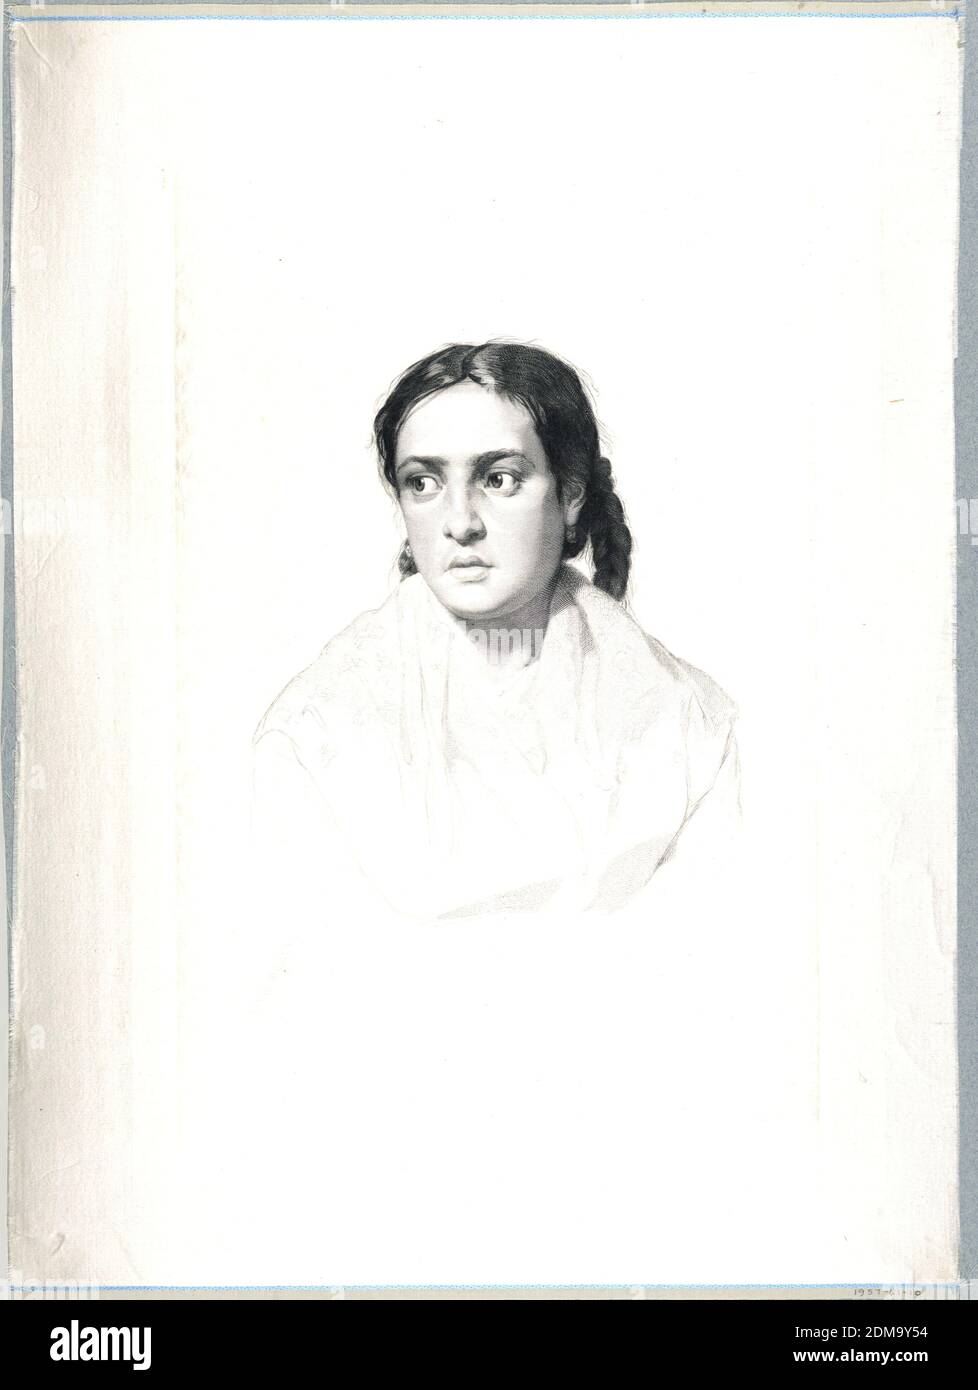 Assunta, Hans Meyer, German, active in Italy, 1846 - 1919, Etching in dark brown ink on white satin, Bust portrait of an Italian peasant girl, seen frontally. She wears her hair long down the back in a pigtail, and looks to the left., Naples, Italy, 1871, Print Stock Photo